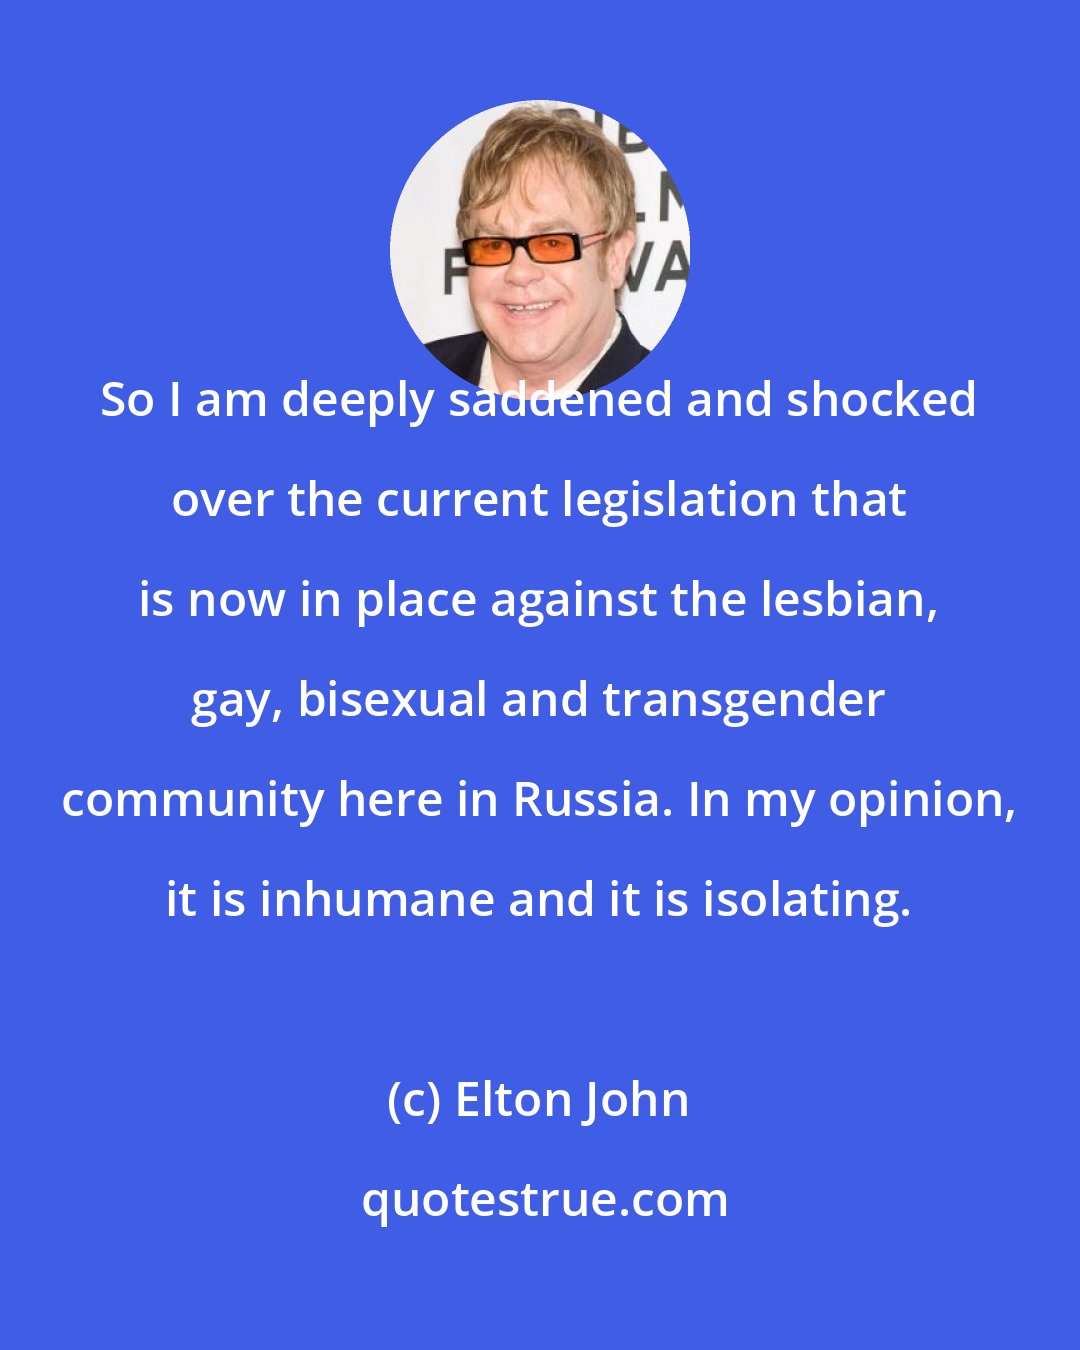 Elton John: So I am deeply saddened and shocked over the current legislation that is now in place against the lesbian, gay, bisexual and transgender community here in Russia. In my opinion, it is inhumane and it is isolating.